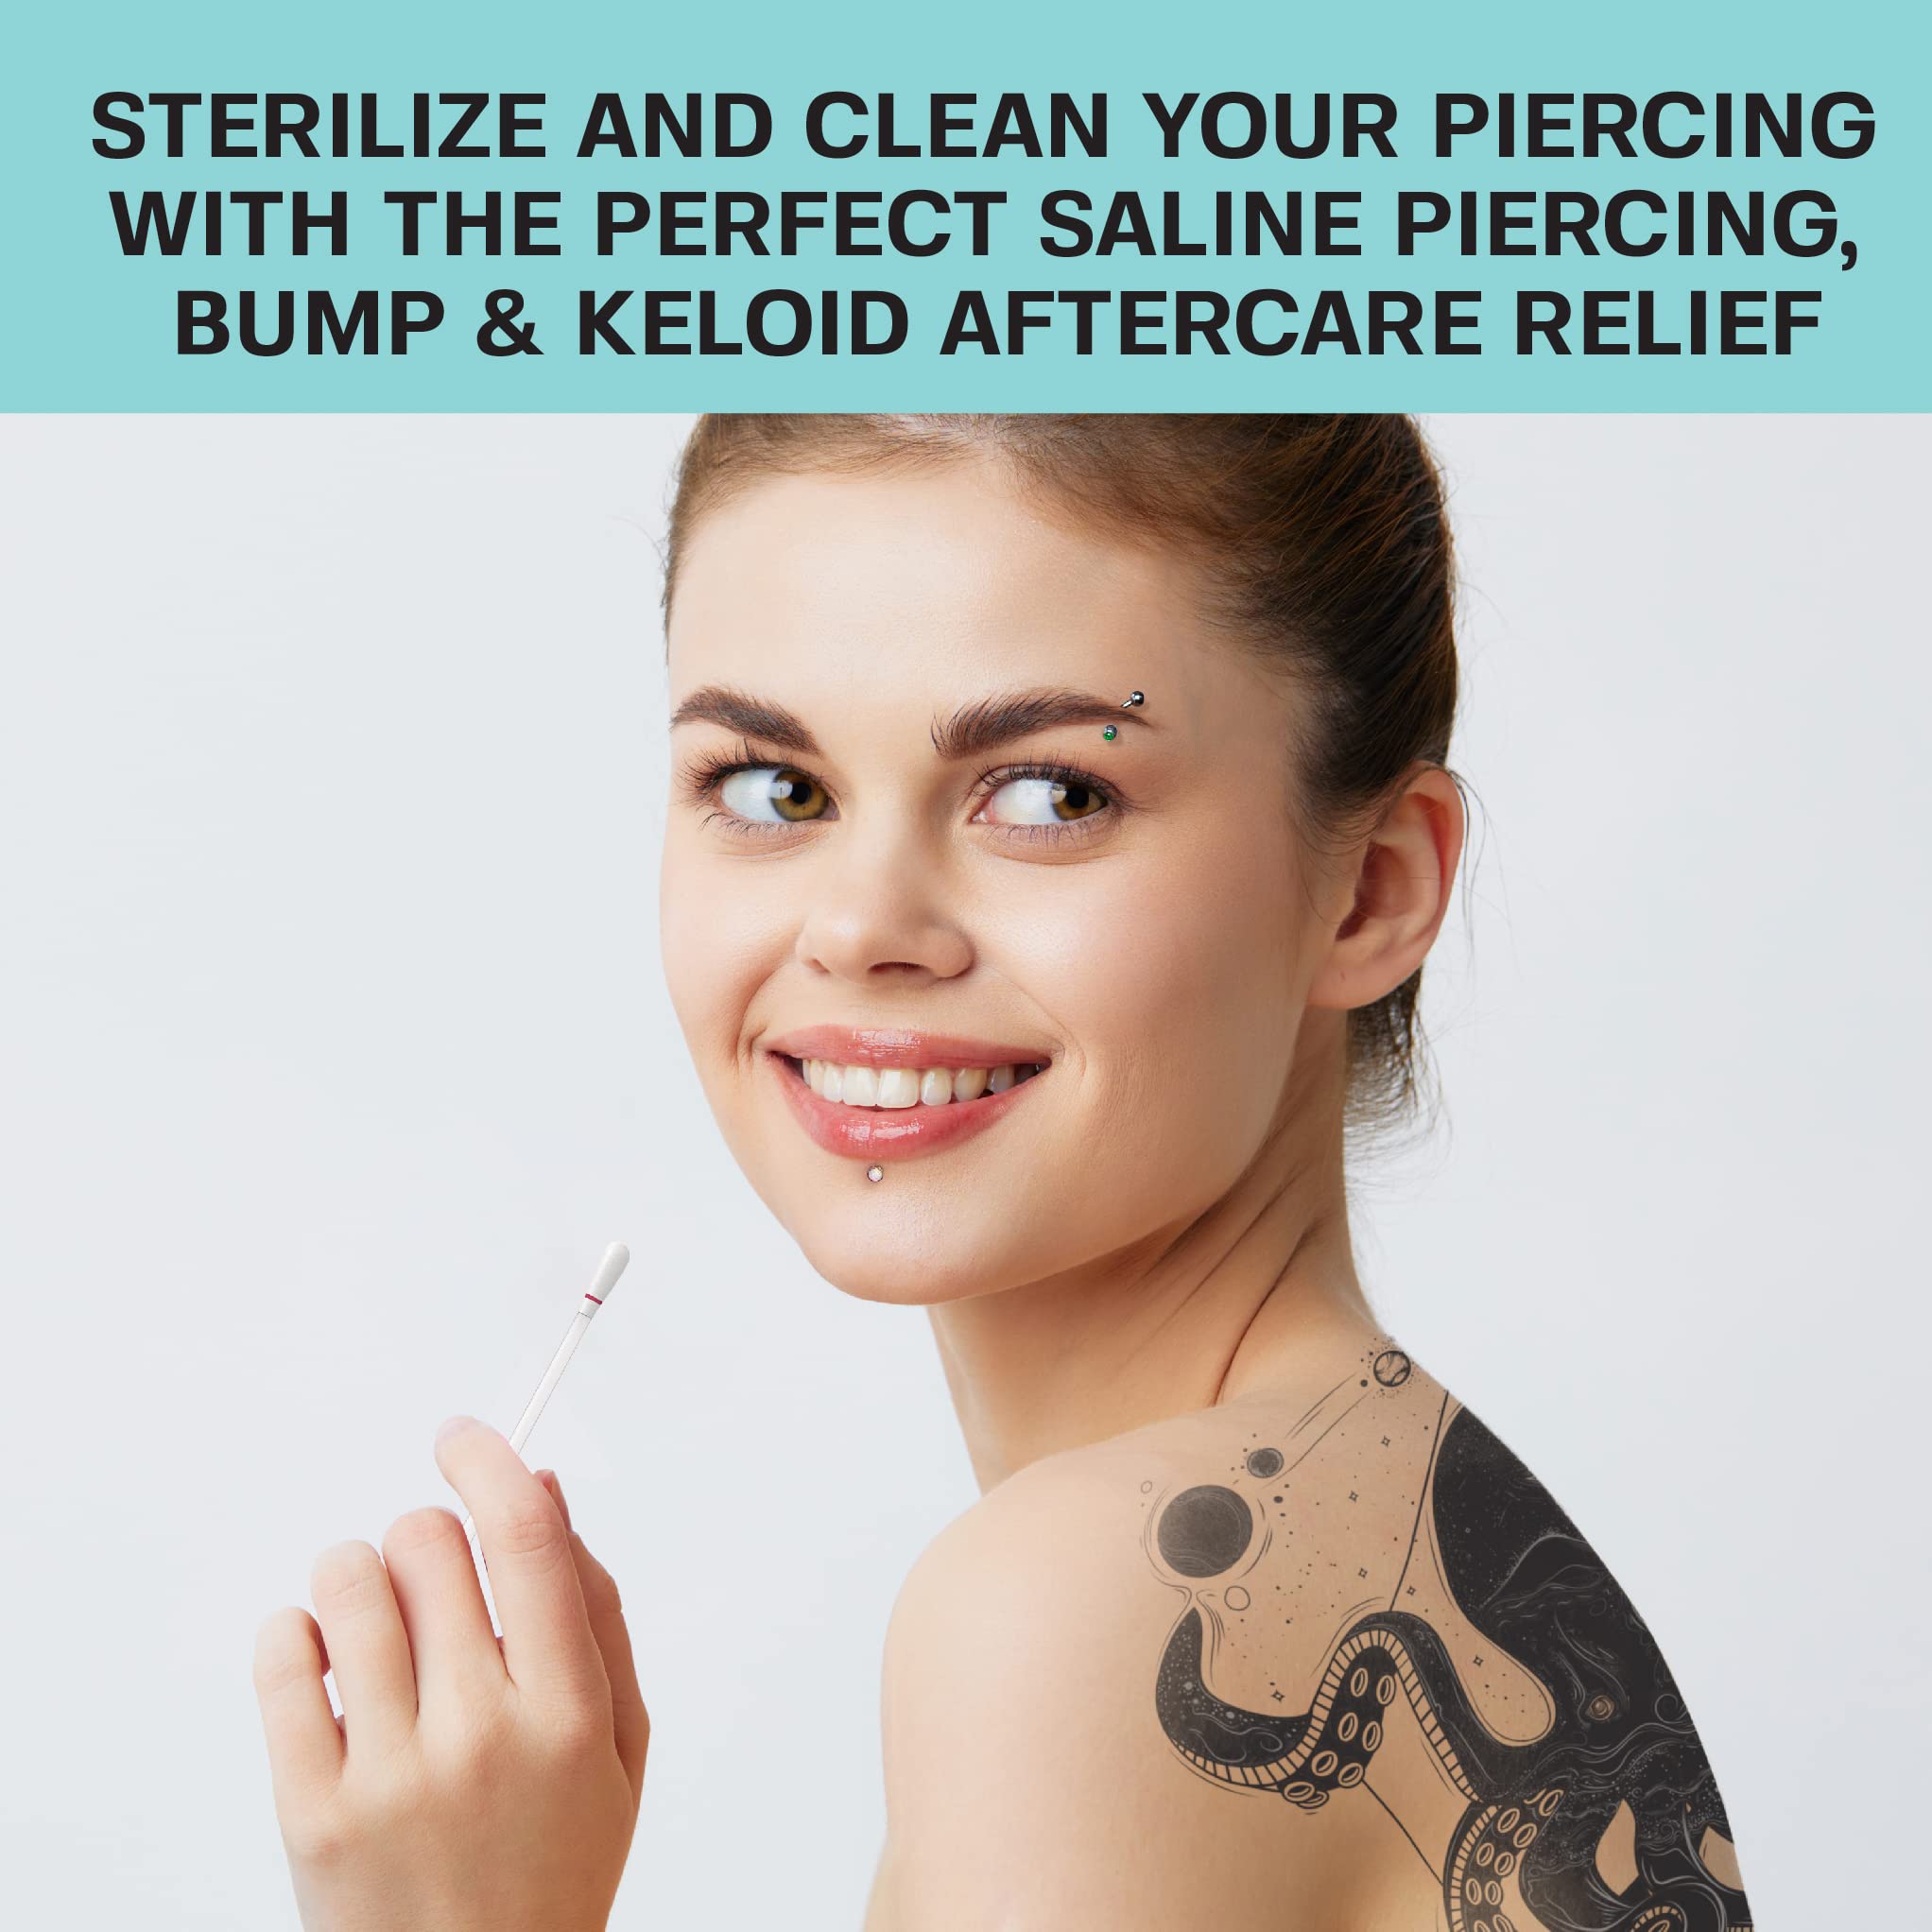 Base Labs Keloid Bump Removal Swabs | Medicated Piercing Aftercare Swabs for Piercing Bumps | Cleansing Gentle Saline Solution for Ear, Nose, Belly, Body Piercings | 40 Swabs